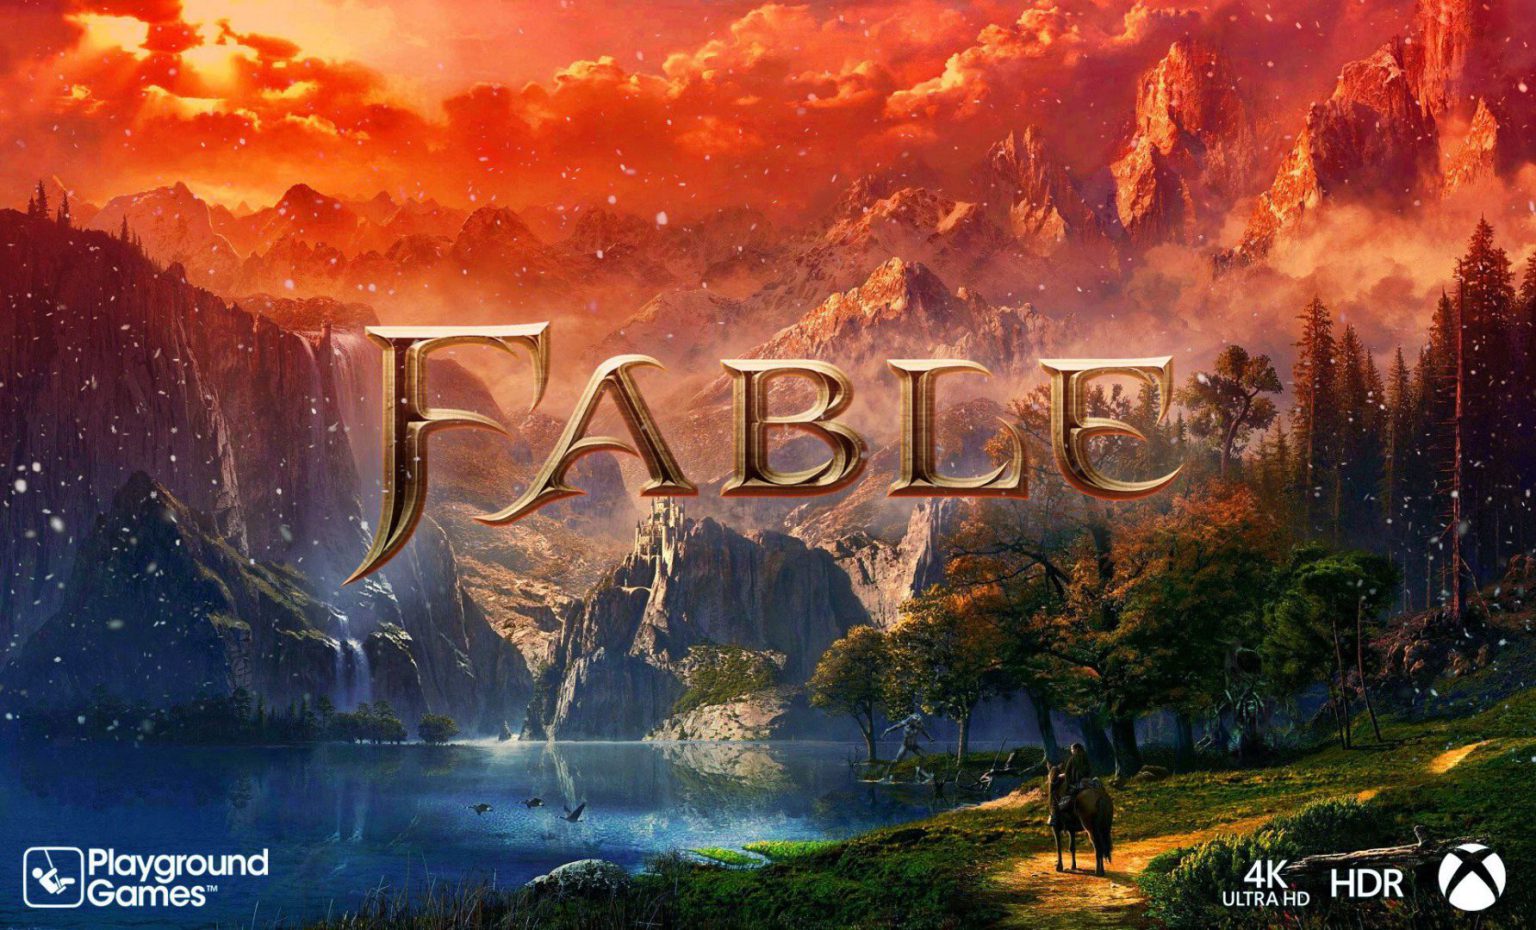 Exclusivos Fable Playground Games